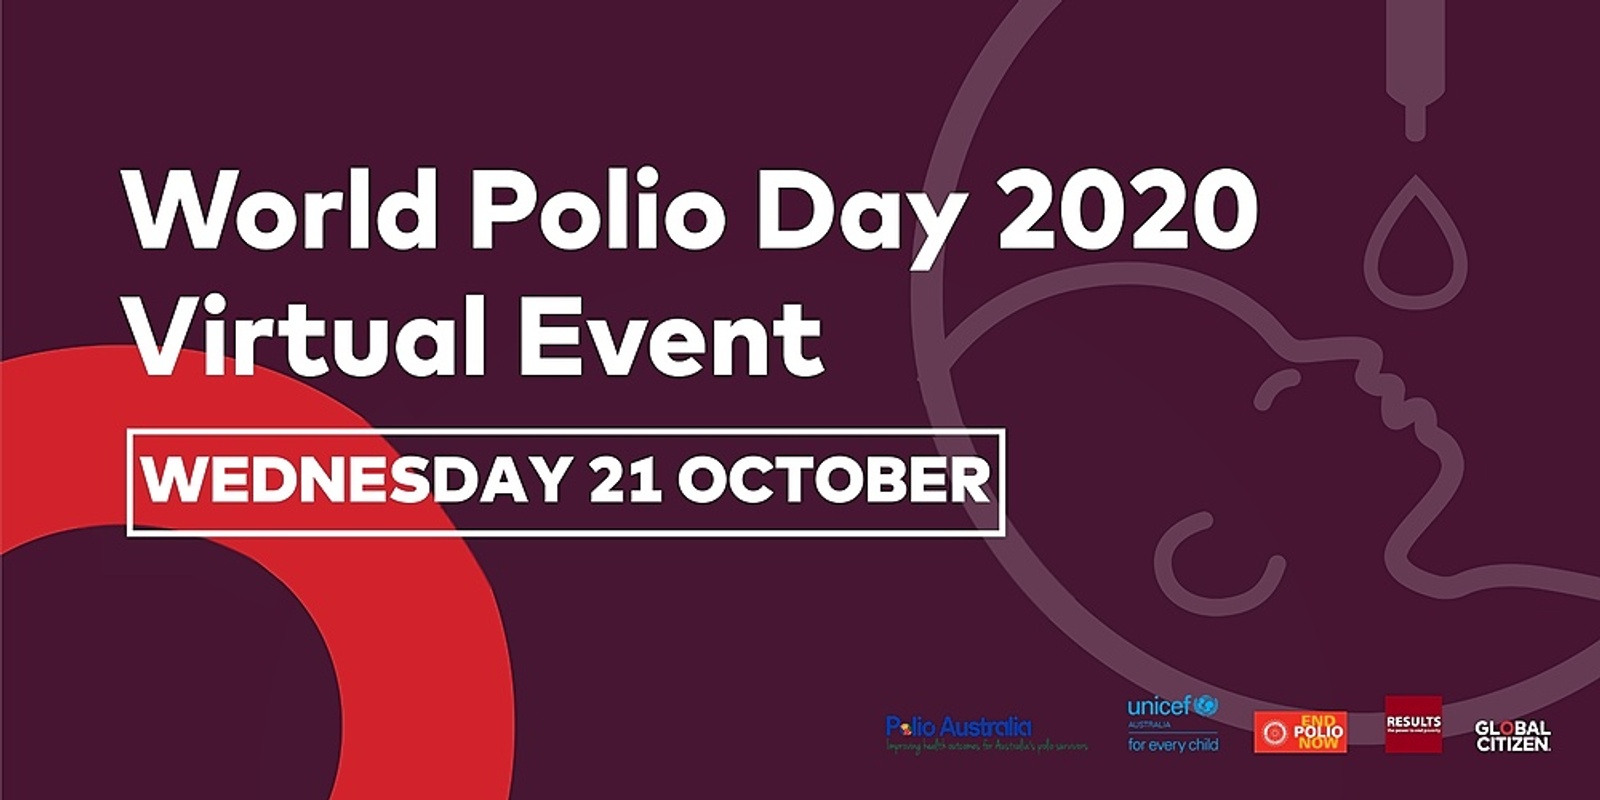 Banner image for World Polio Day 2020 Virtual Event